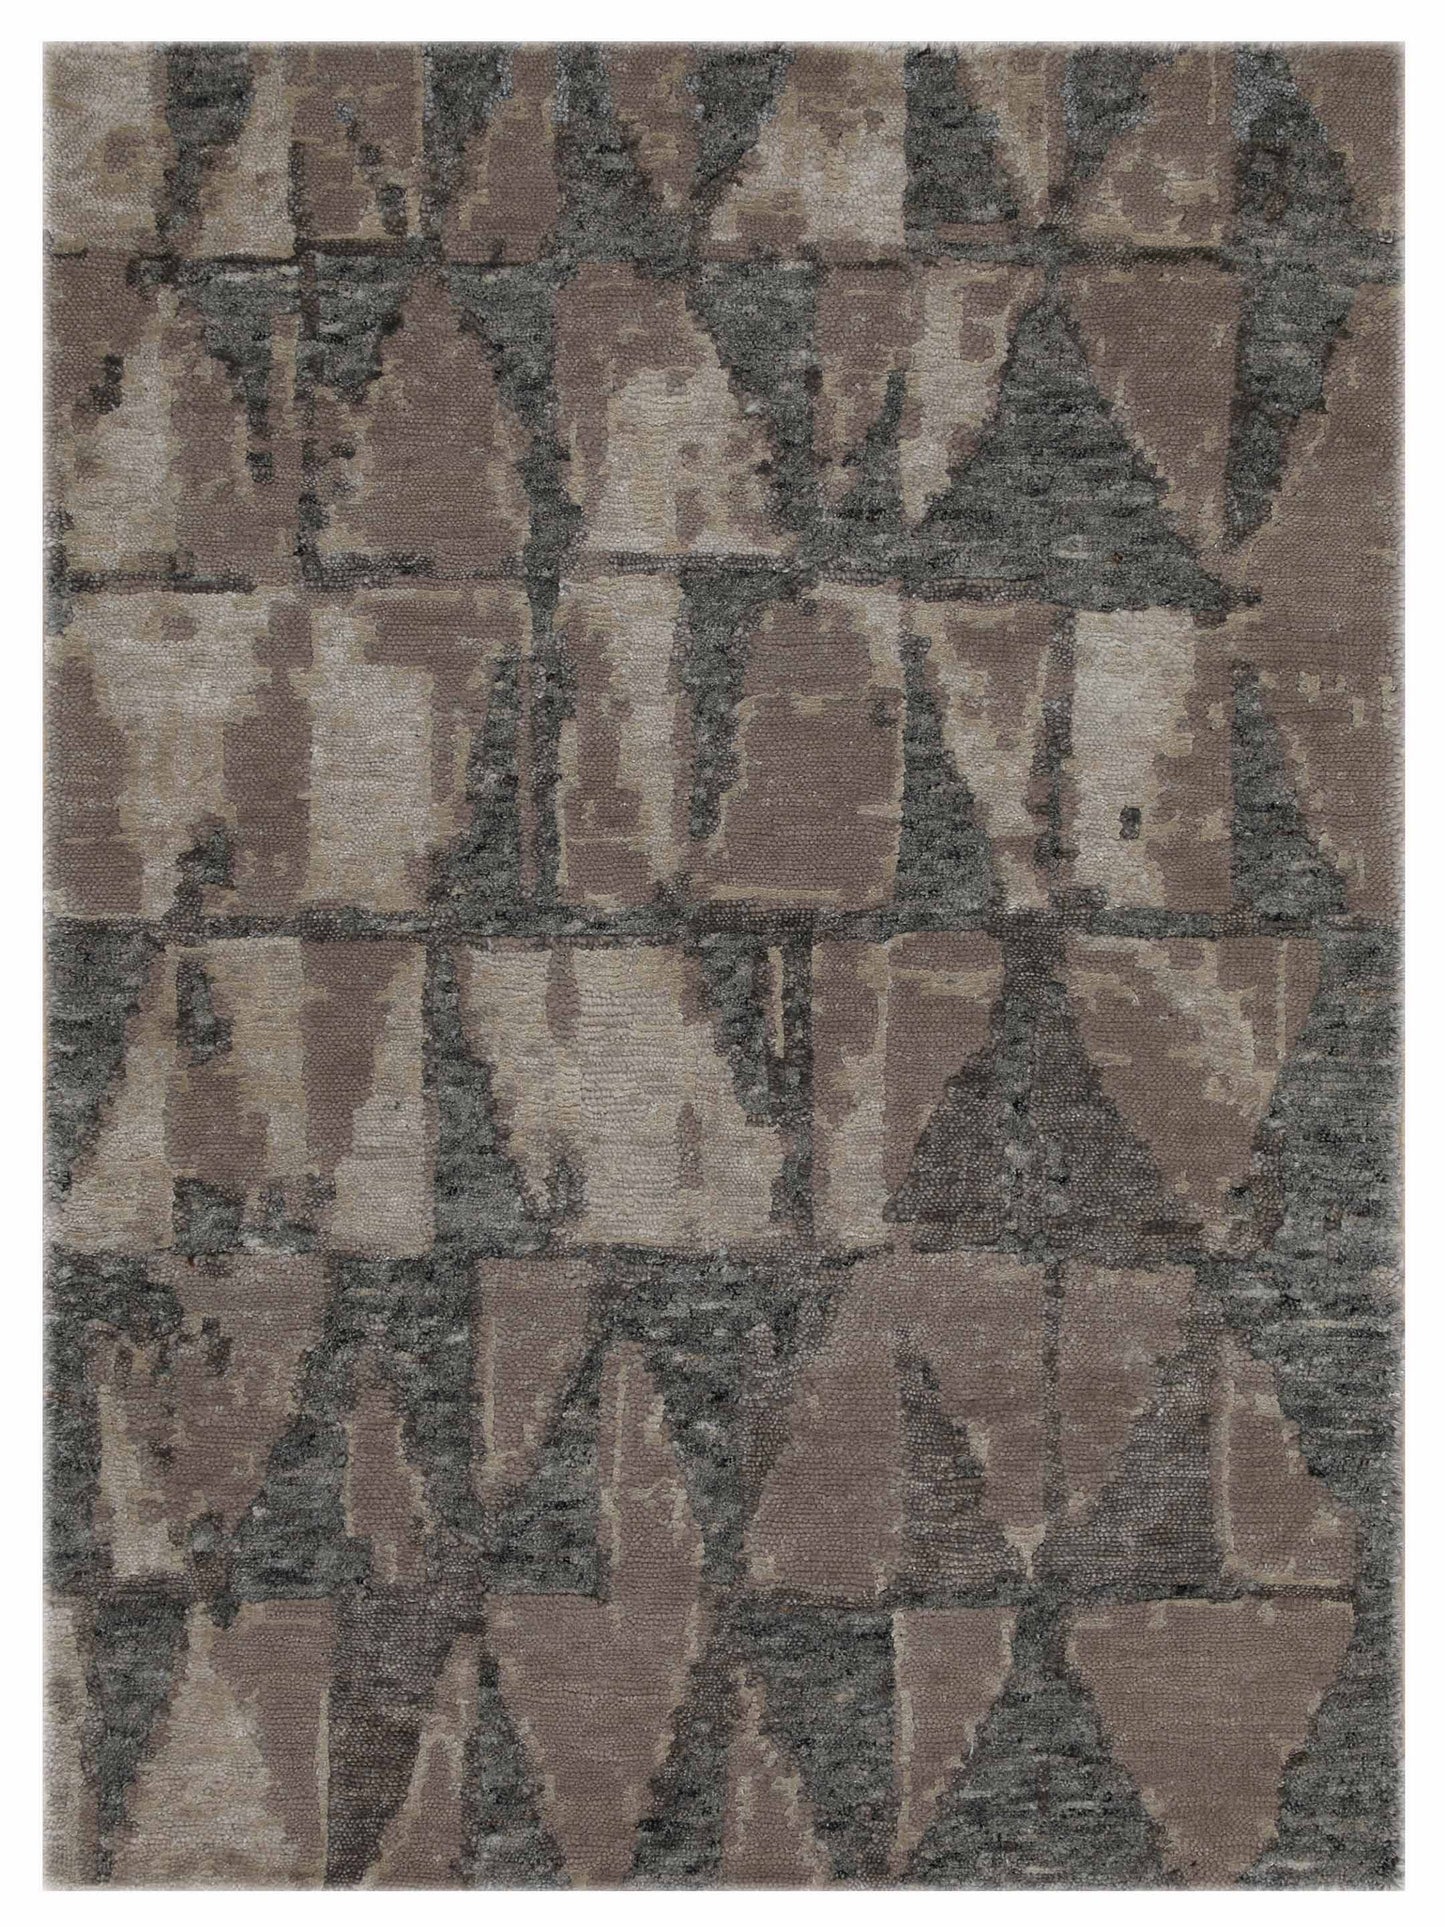 Artisan Mary MN-326 Tonal Contemporary Knotted Rug